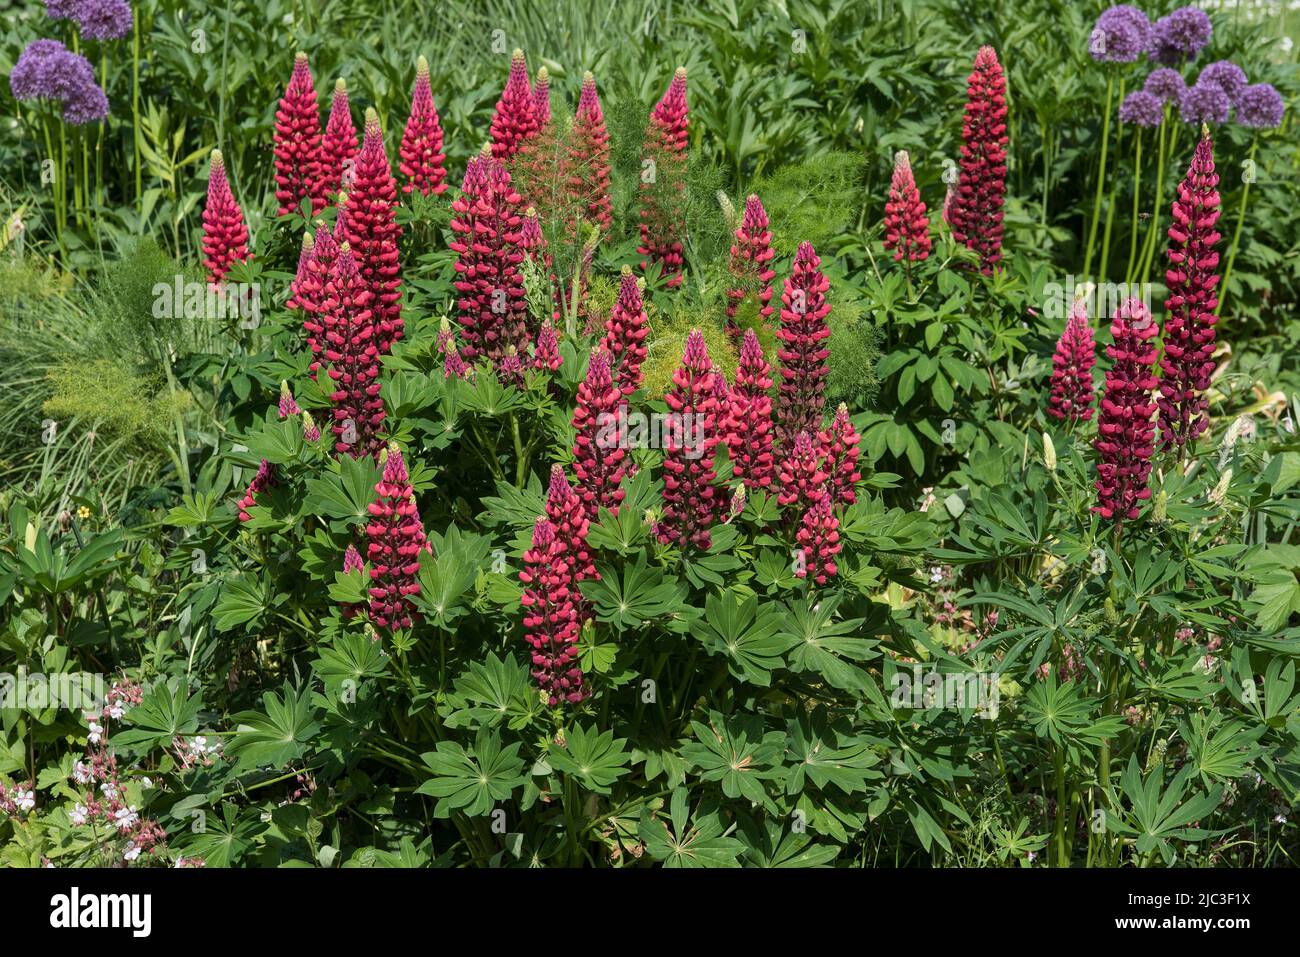 Flower spikes of red Lupin, aka Lupines or Lupinus. A perennial that attracts bees and butterflies. Stock Photo